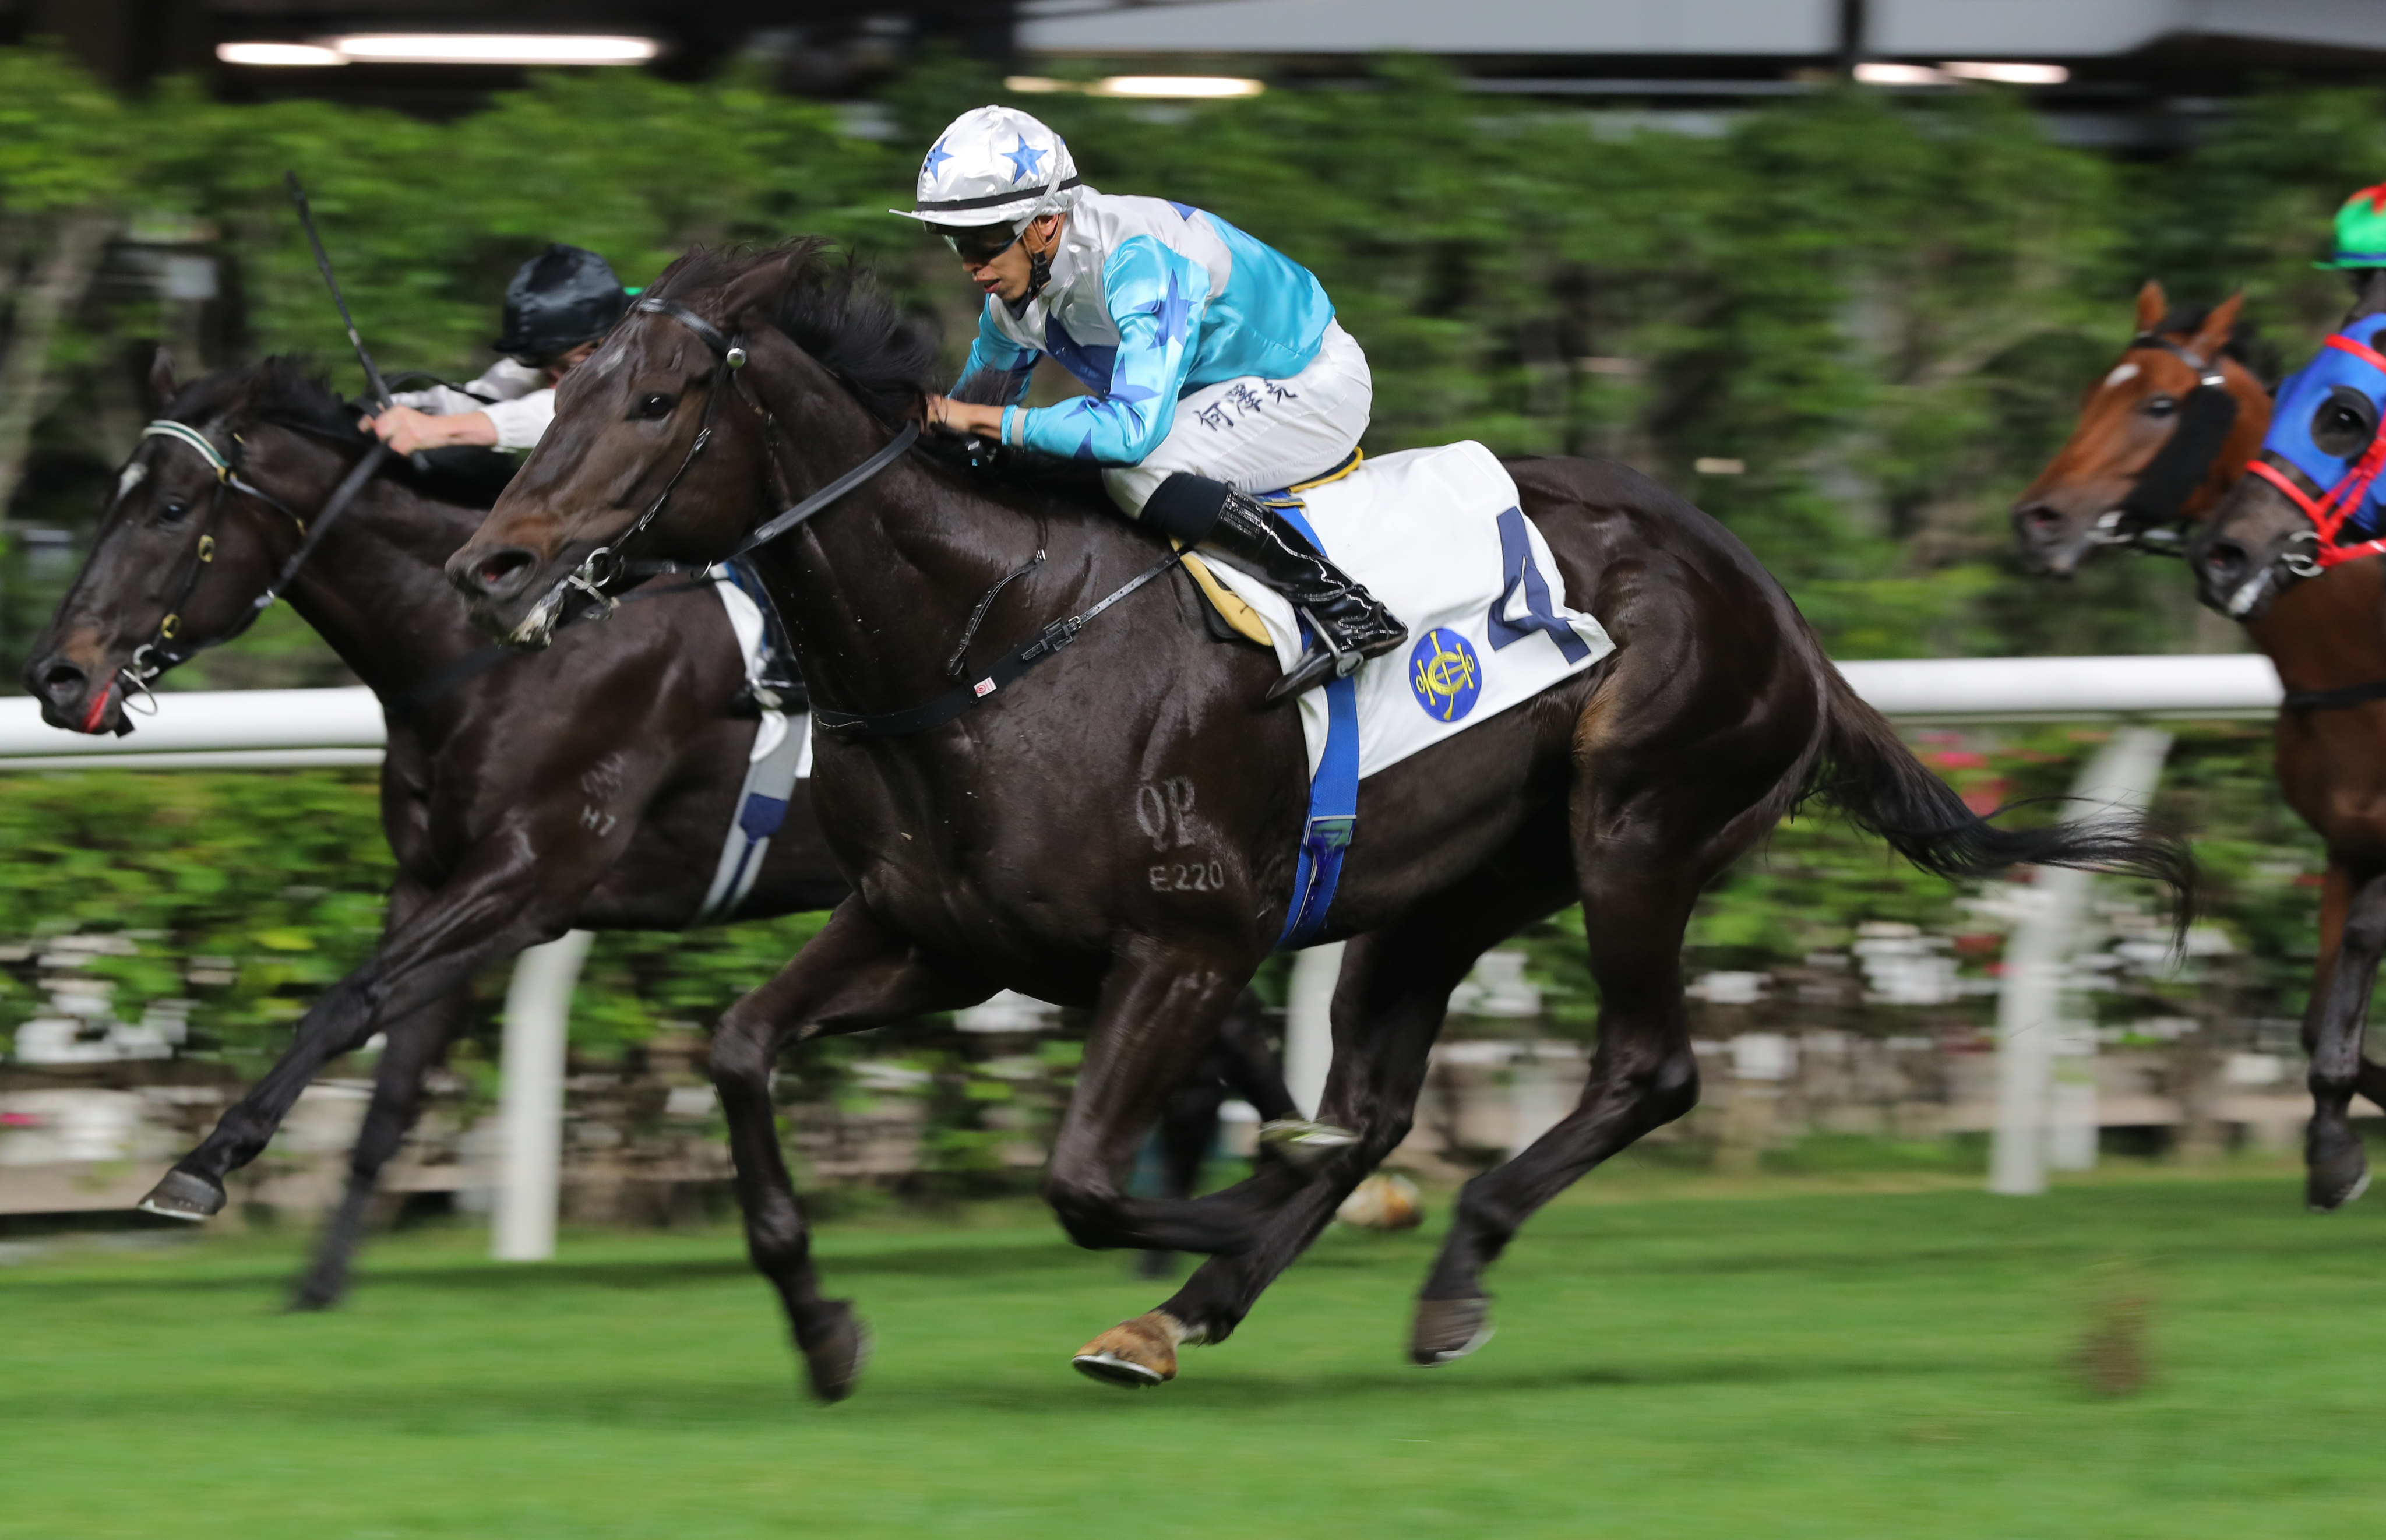 Gold Gold Baby surges late under Vincent Ho to win for the third time at Happy Valley this season. Photo: Kenneth Chan